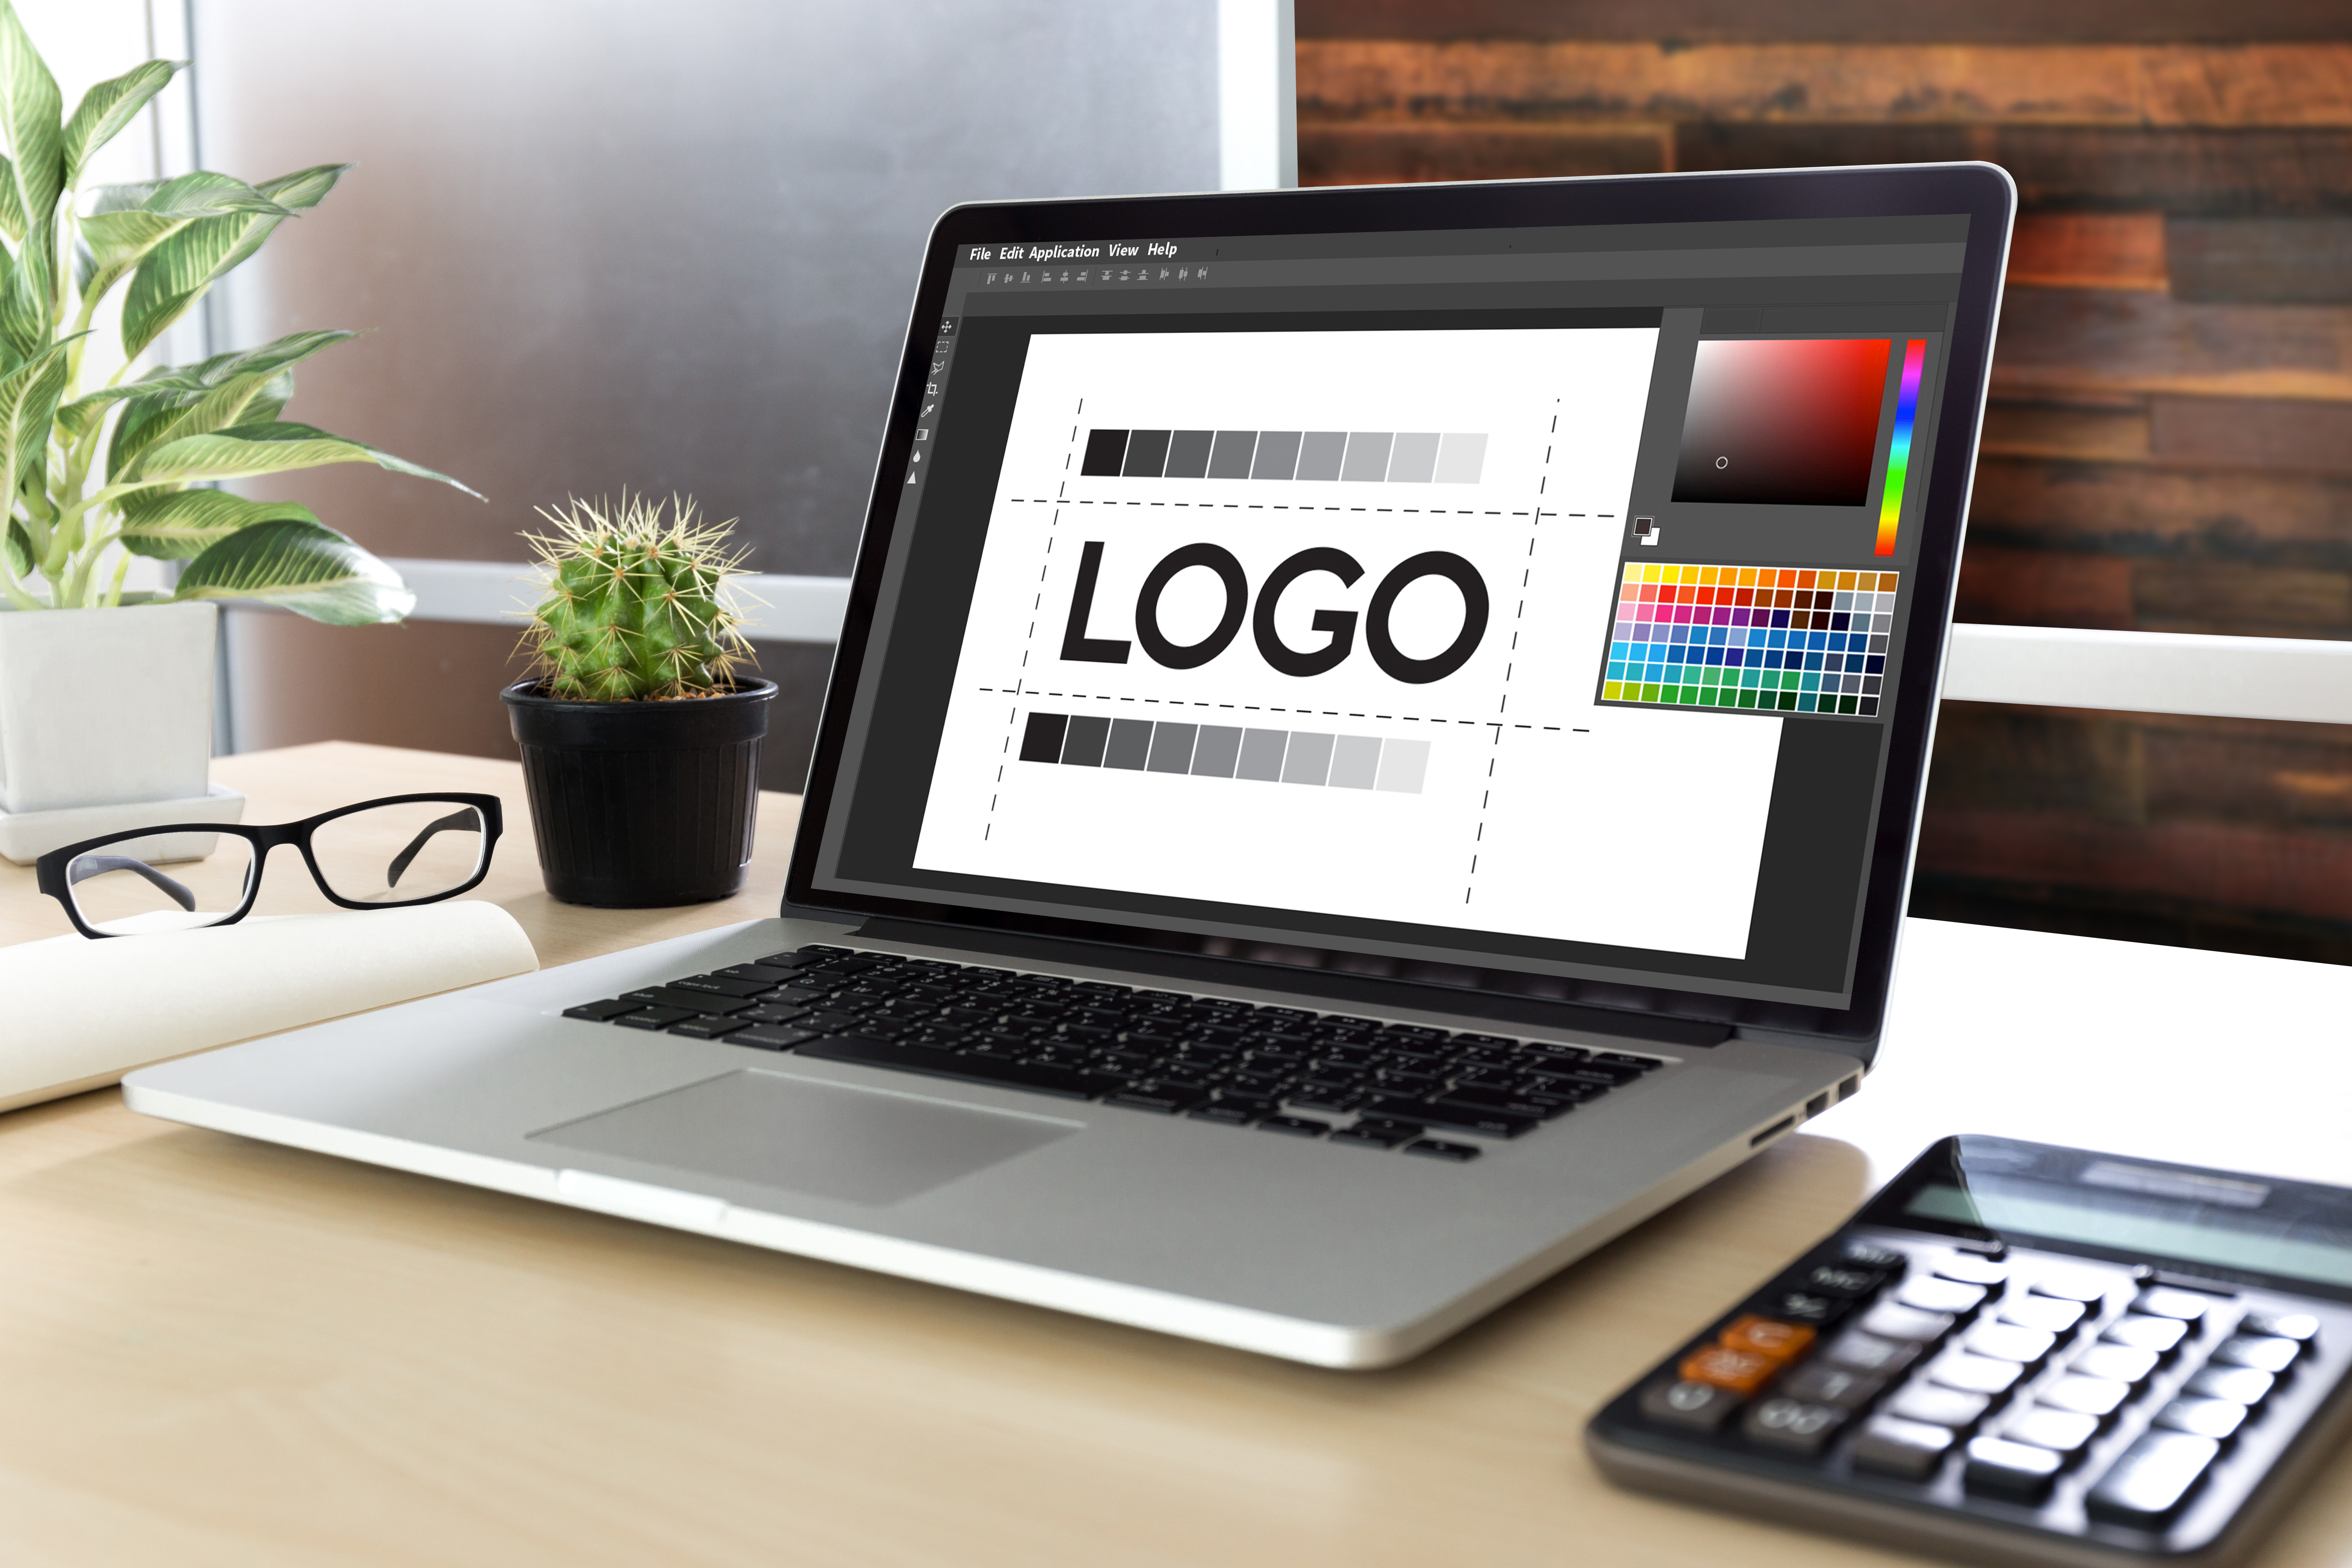 How to Design a Logo for Your Business - The Ultimate Guide | How to Design a Logo for Your Business - [Step-by-Step Guide]  | How to Create a Perfect Logo for Your Business - The Ultimate Guide